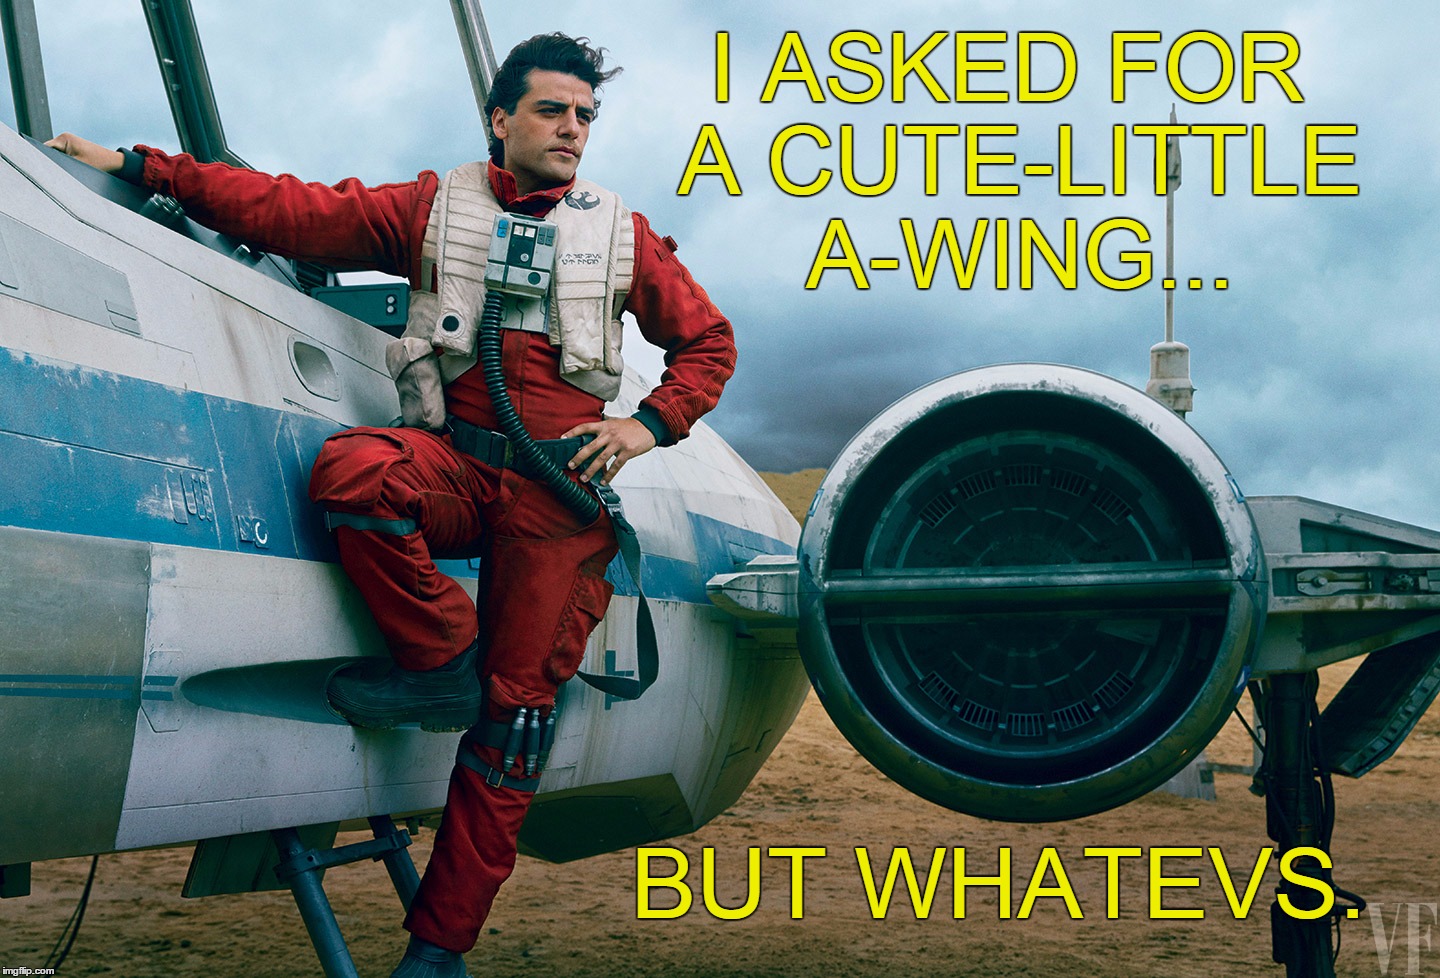 Poe Dameron Cute A-Wing | I ASKED FOR A CUTE-LITTLE A-WING... BUT WHATEVS. | image tagged in poe dameron x-wing,lgbt,a-wing,whatevs,whatever,star wars the force awakens | made w/ Imgflip meme maker